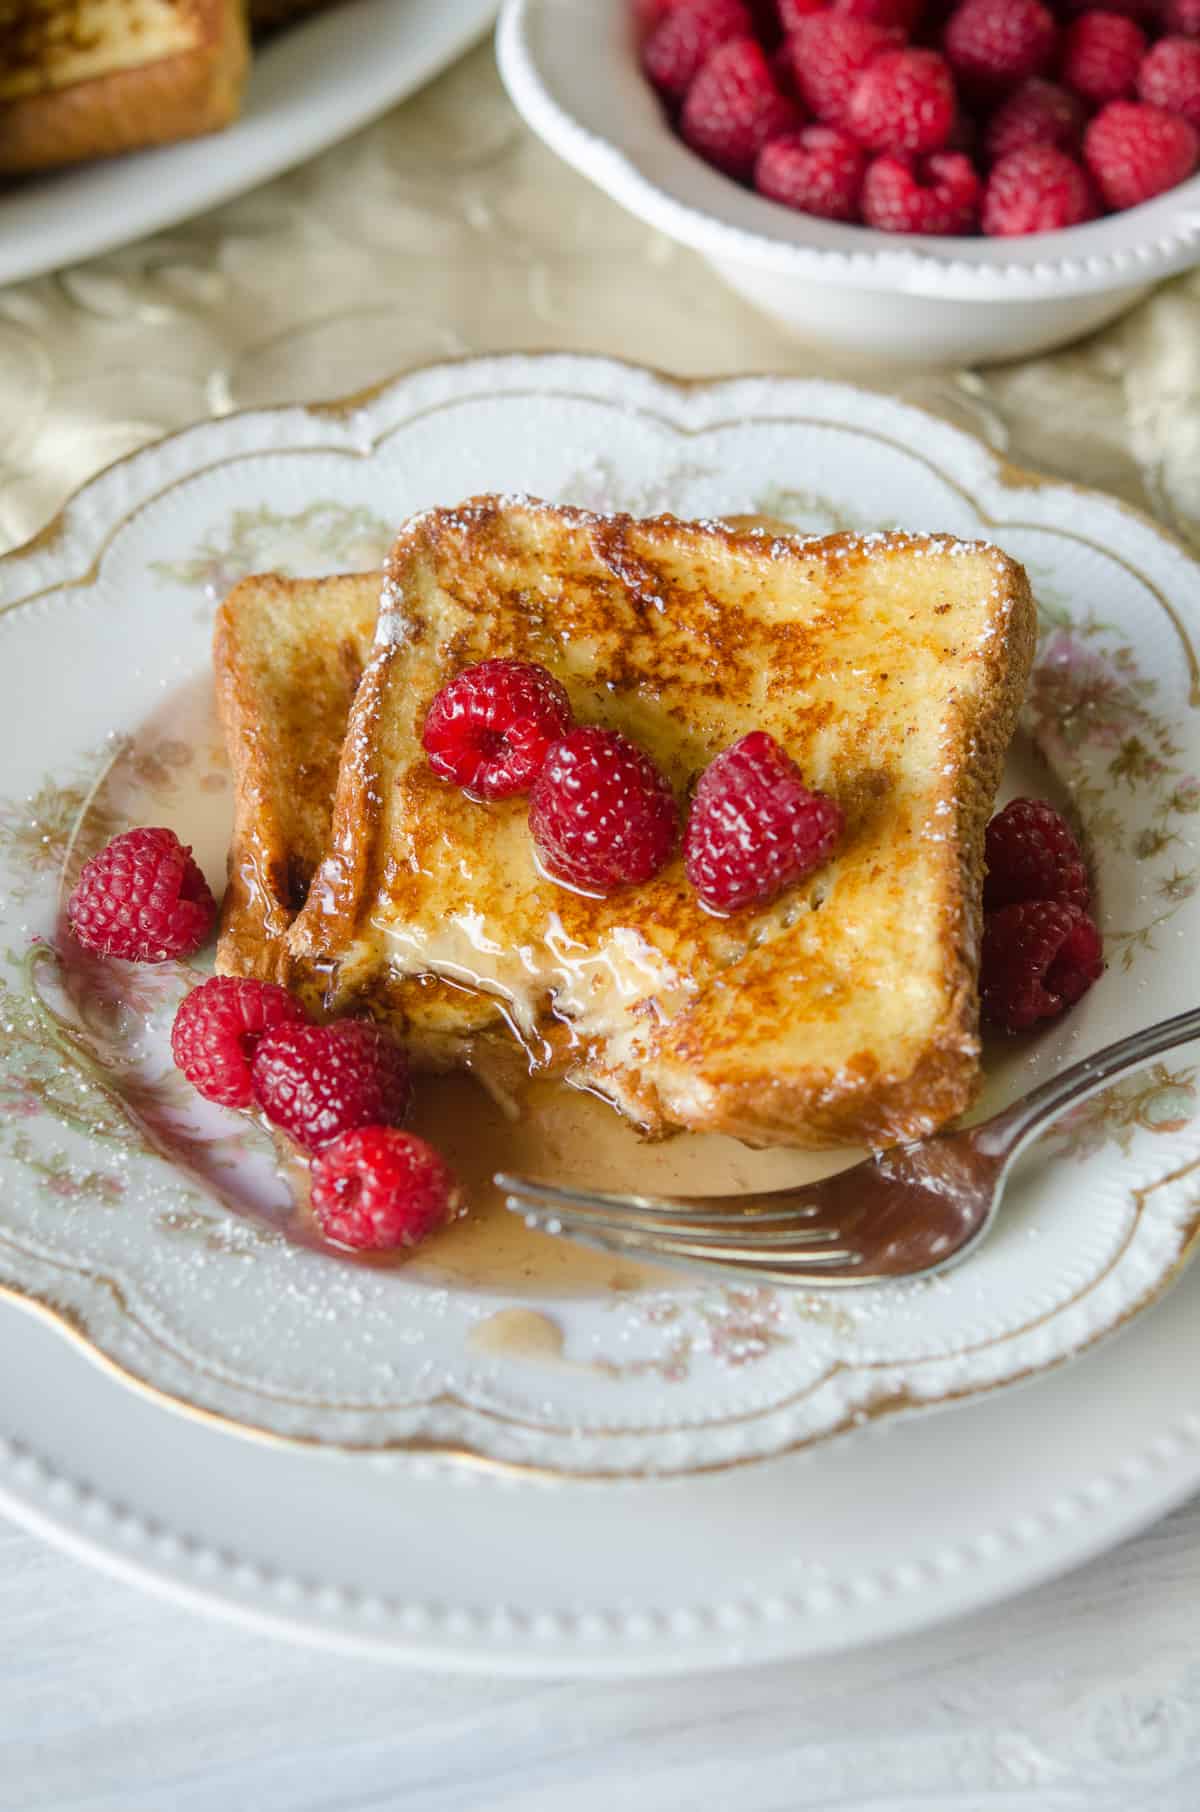 Eggnog French Toast topped with maple syrup with a bite missing on a china plate with raspberries and a fork.